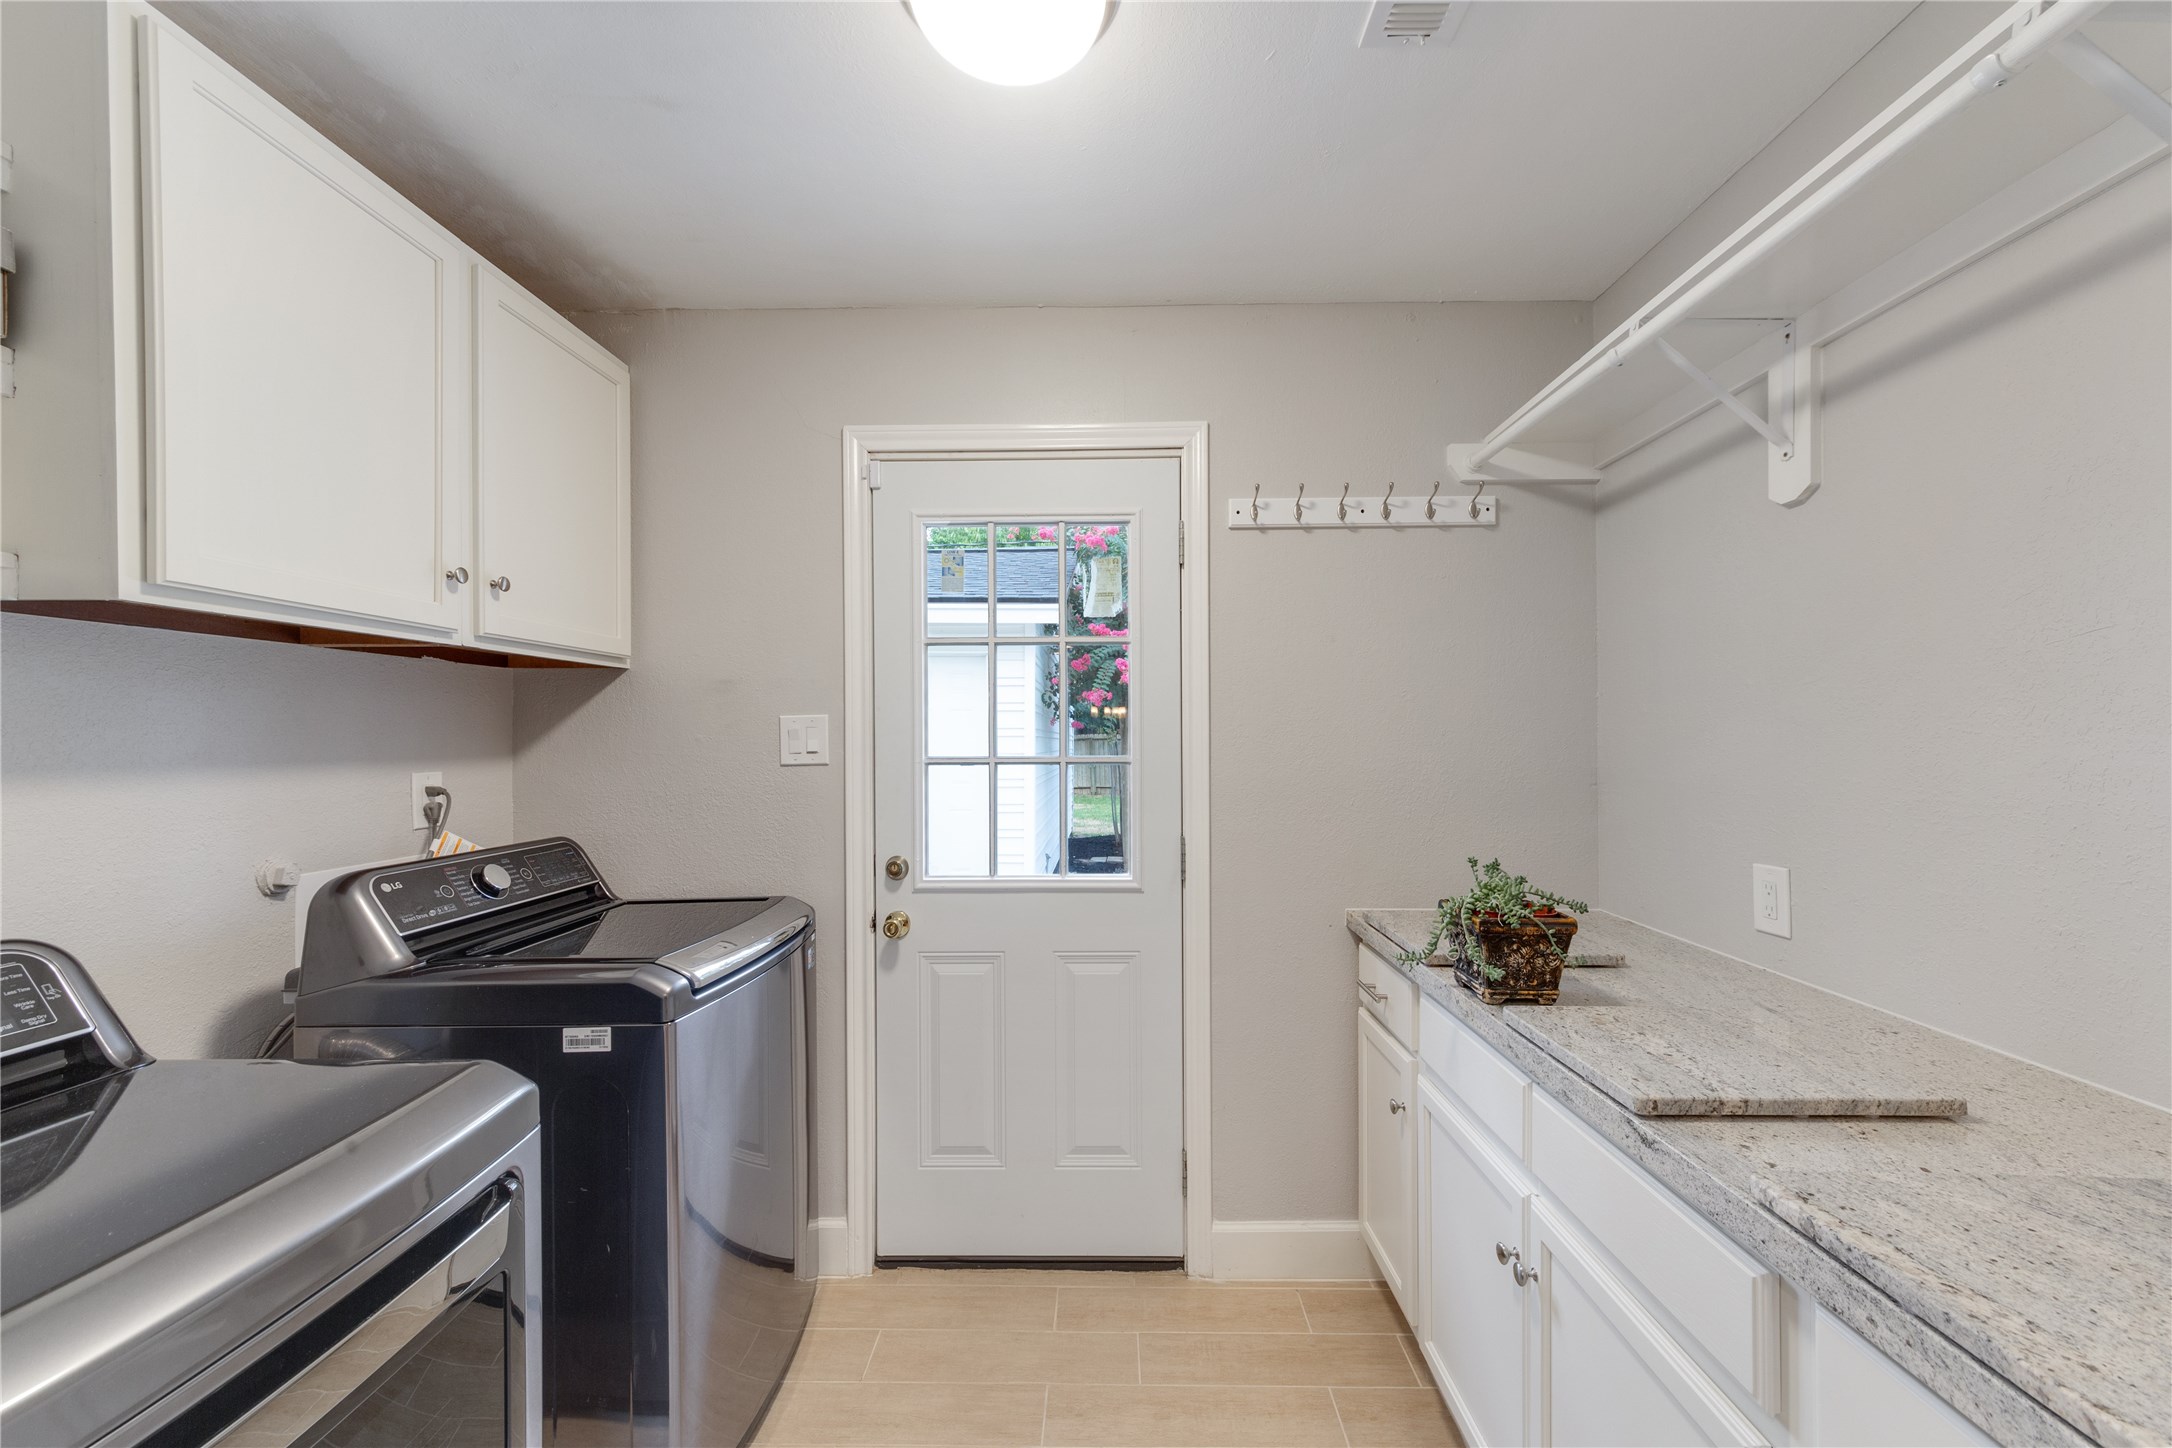 Spacious laundry room next to the kitchen gives you more work space.